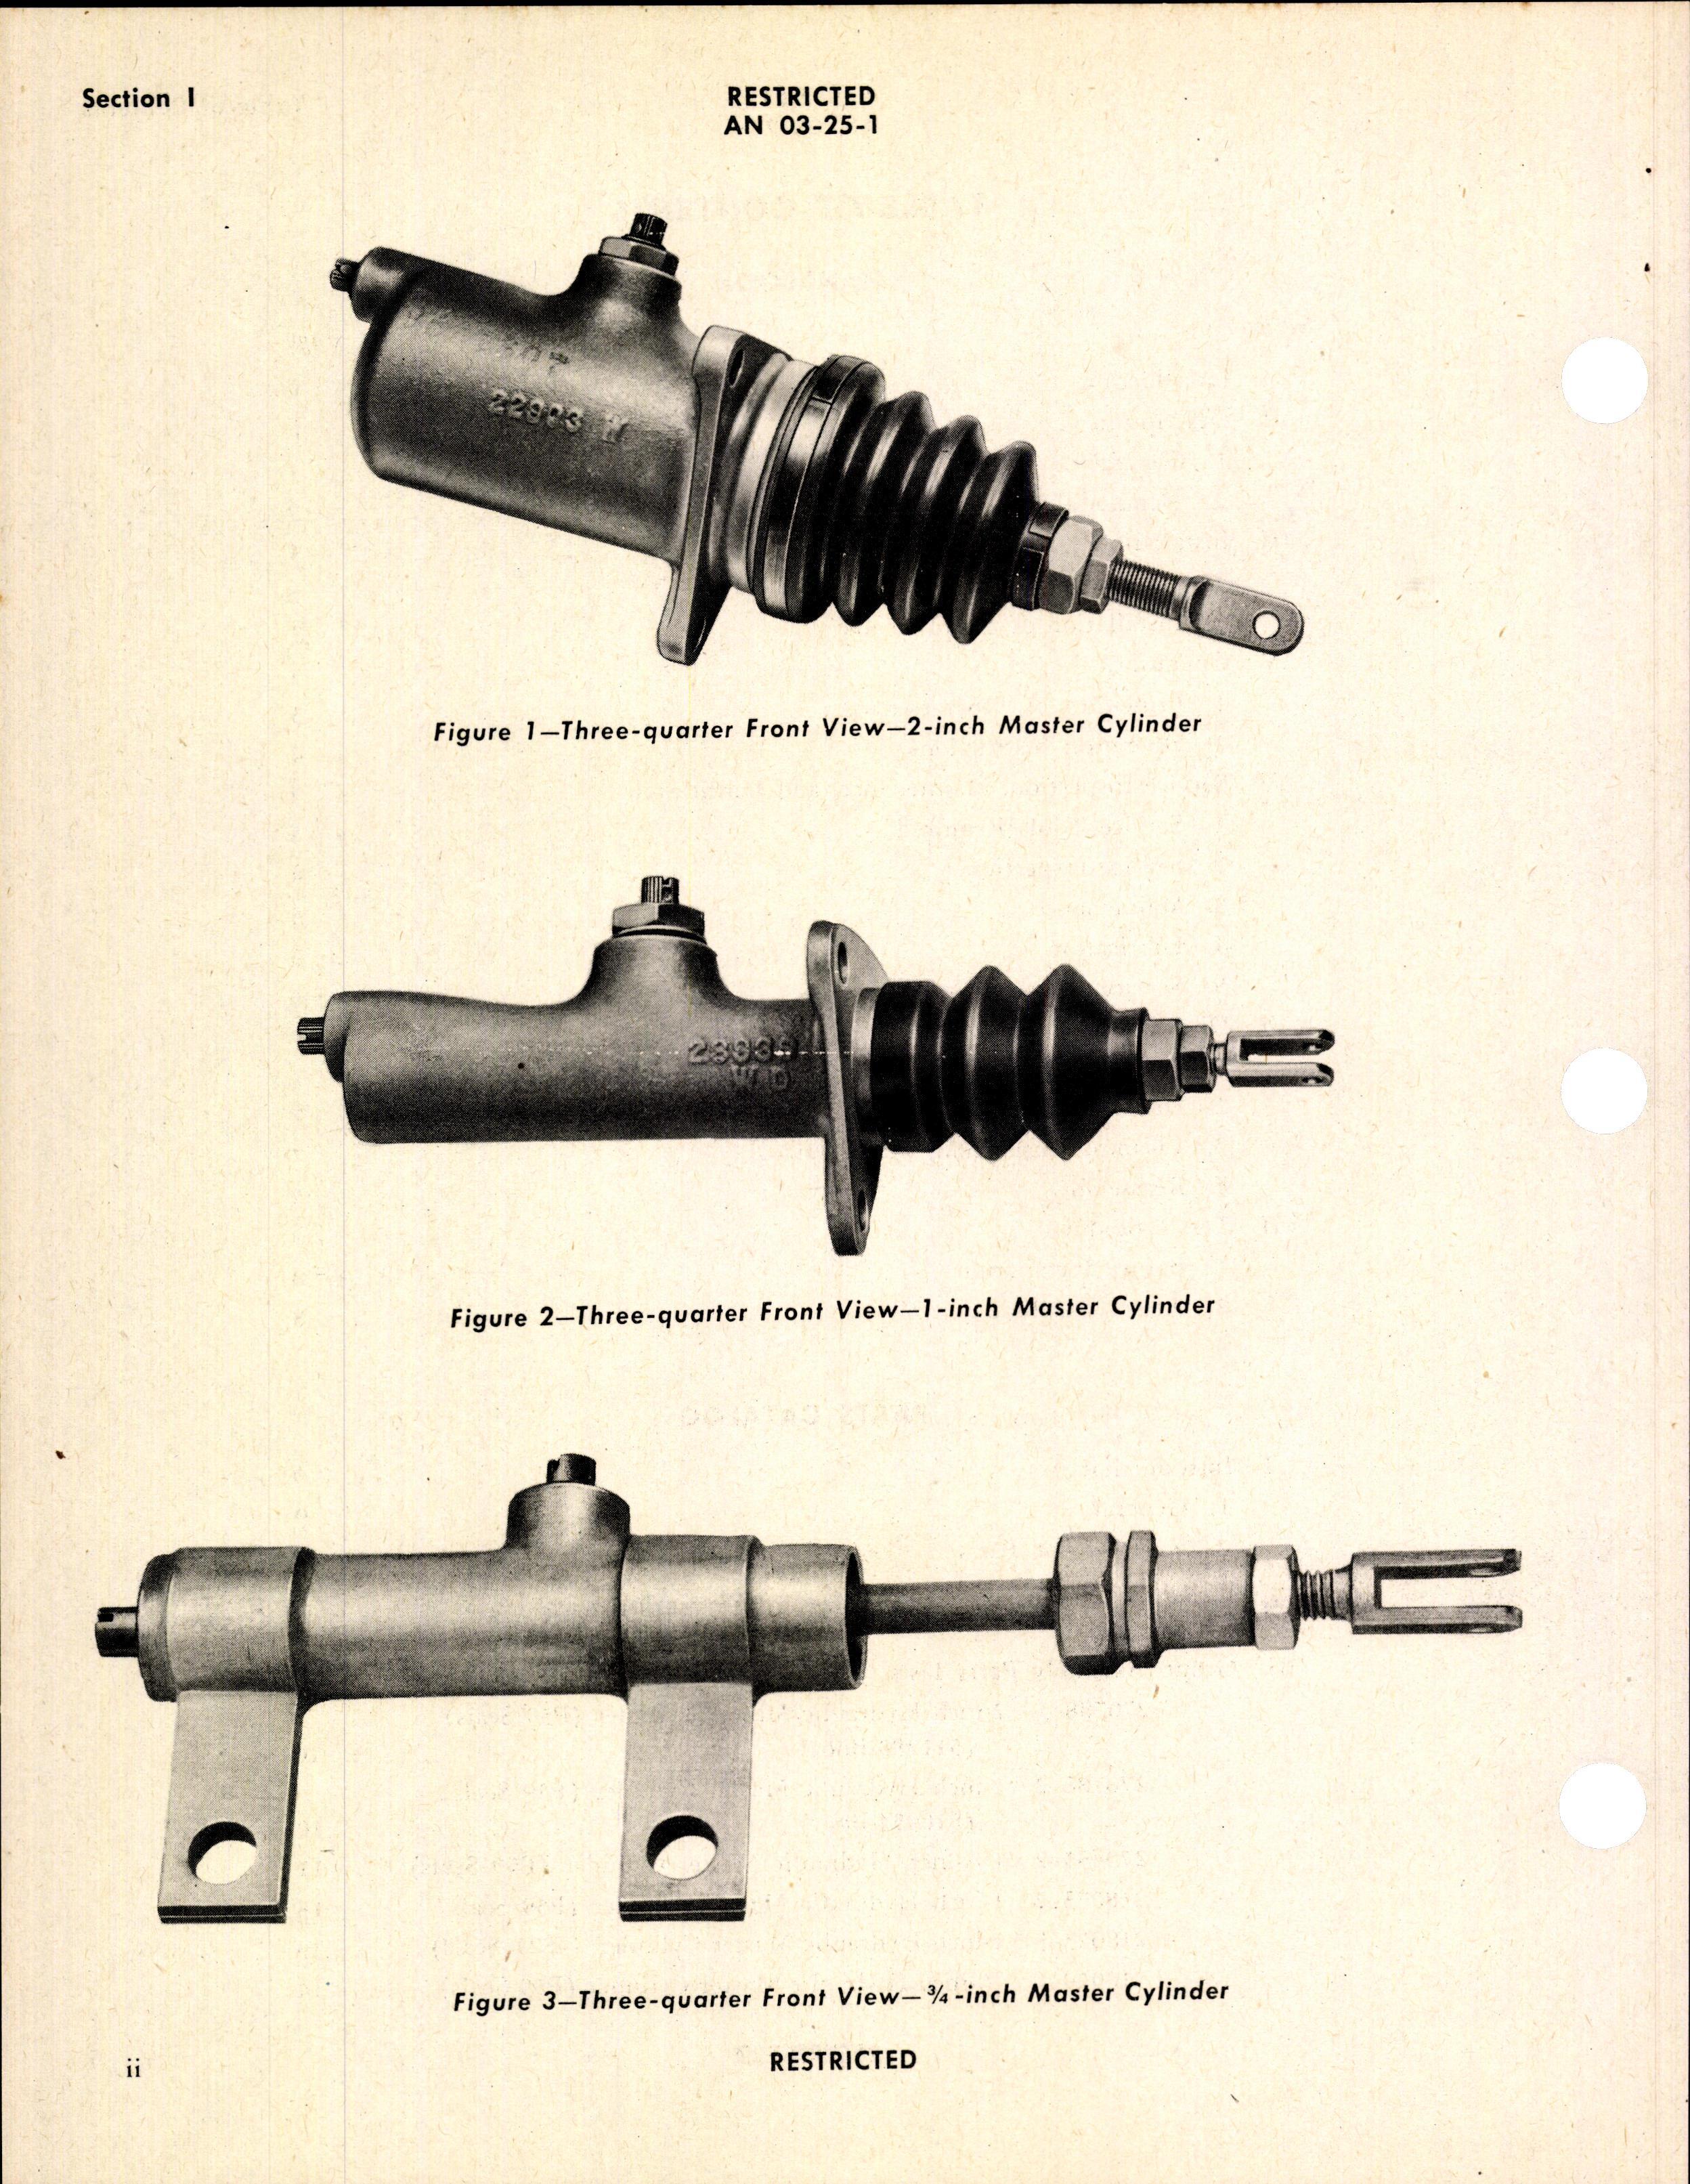 Sample page 4 from AirCorps Library document: Handbook of Instructions with Parts Catalog for Goodyear Master Brake Cylinders